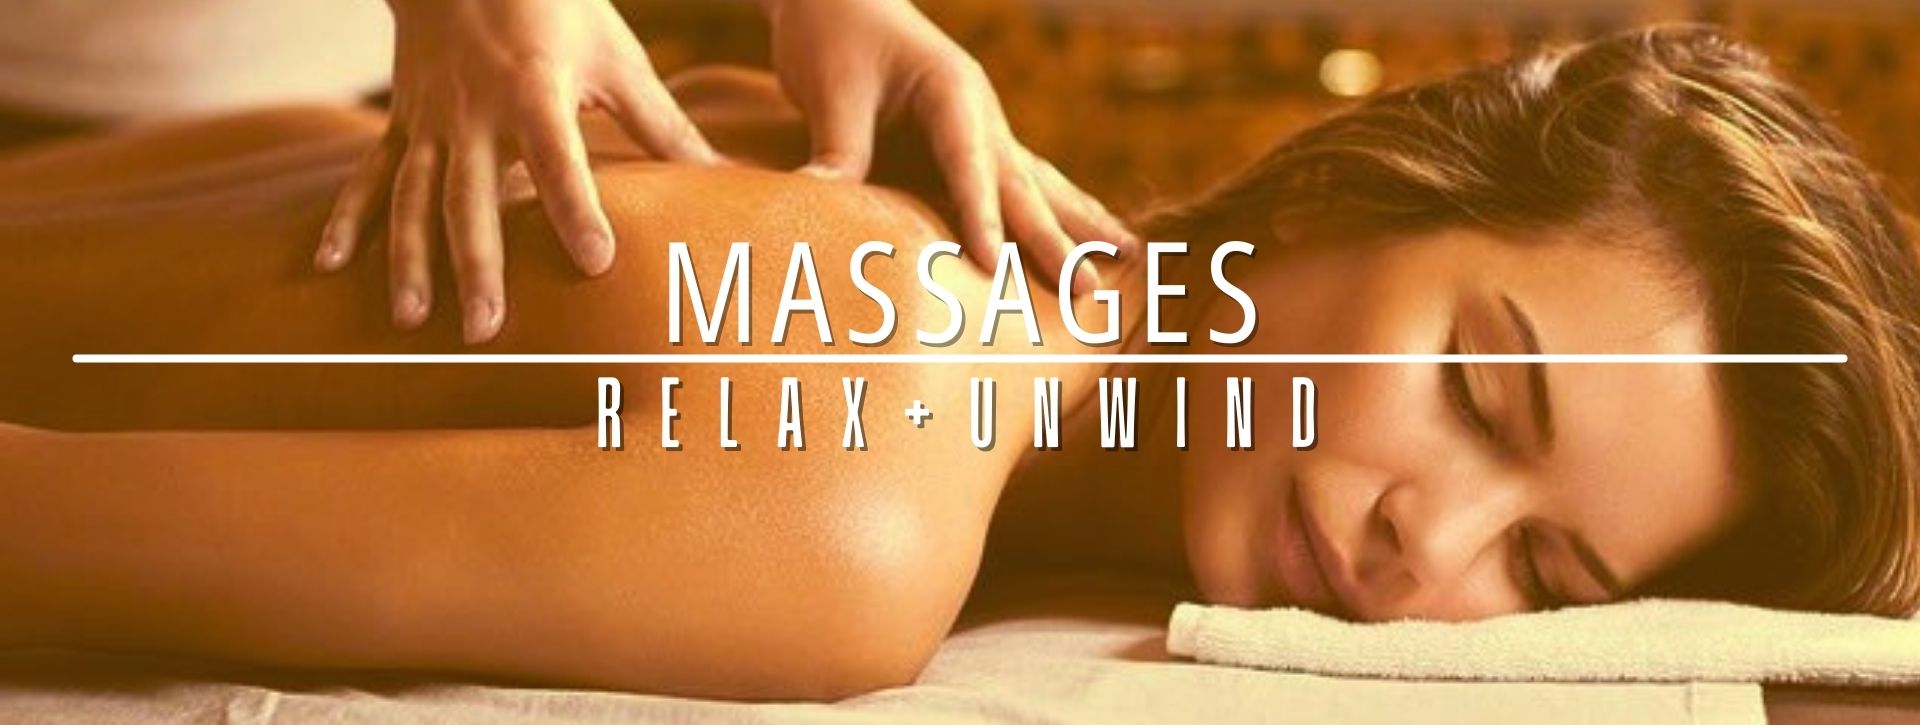 woman having a body massage promoting relaxation + unwind